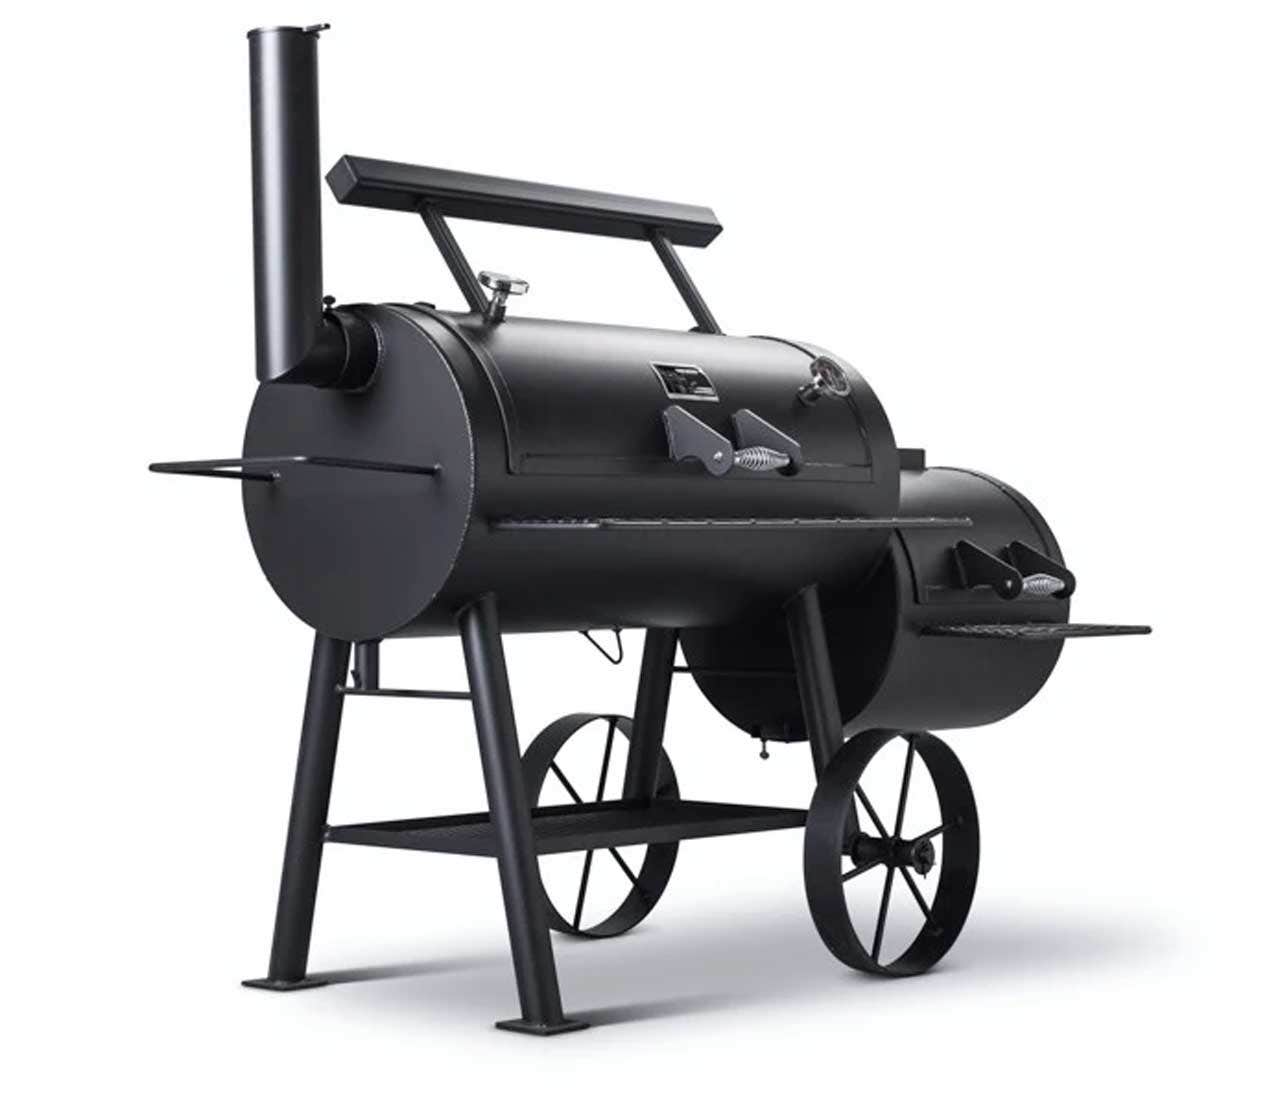 Yoder Smokers 20 inch Loaded Wichita Offset Smoker Outdoor Grills 10020001